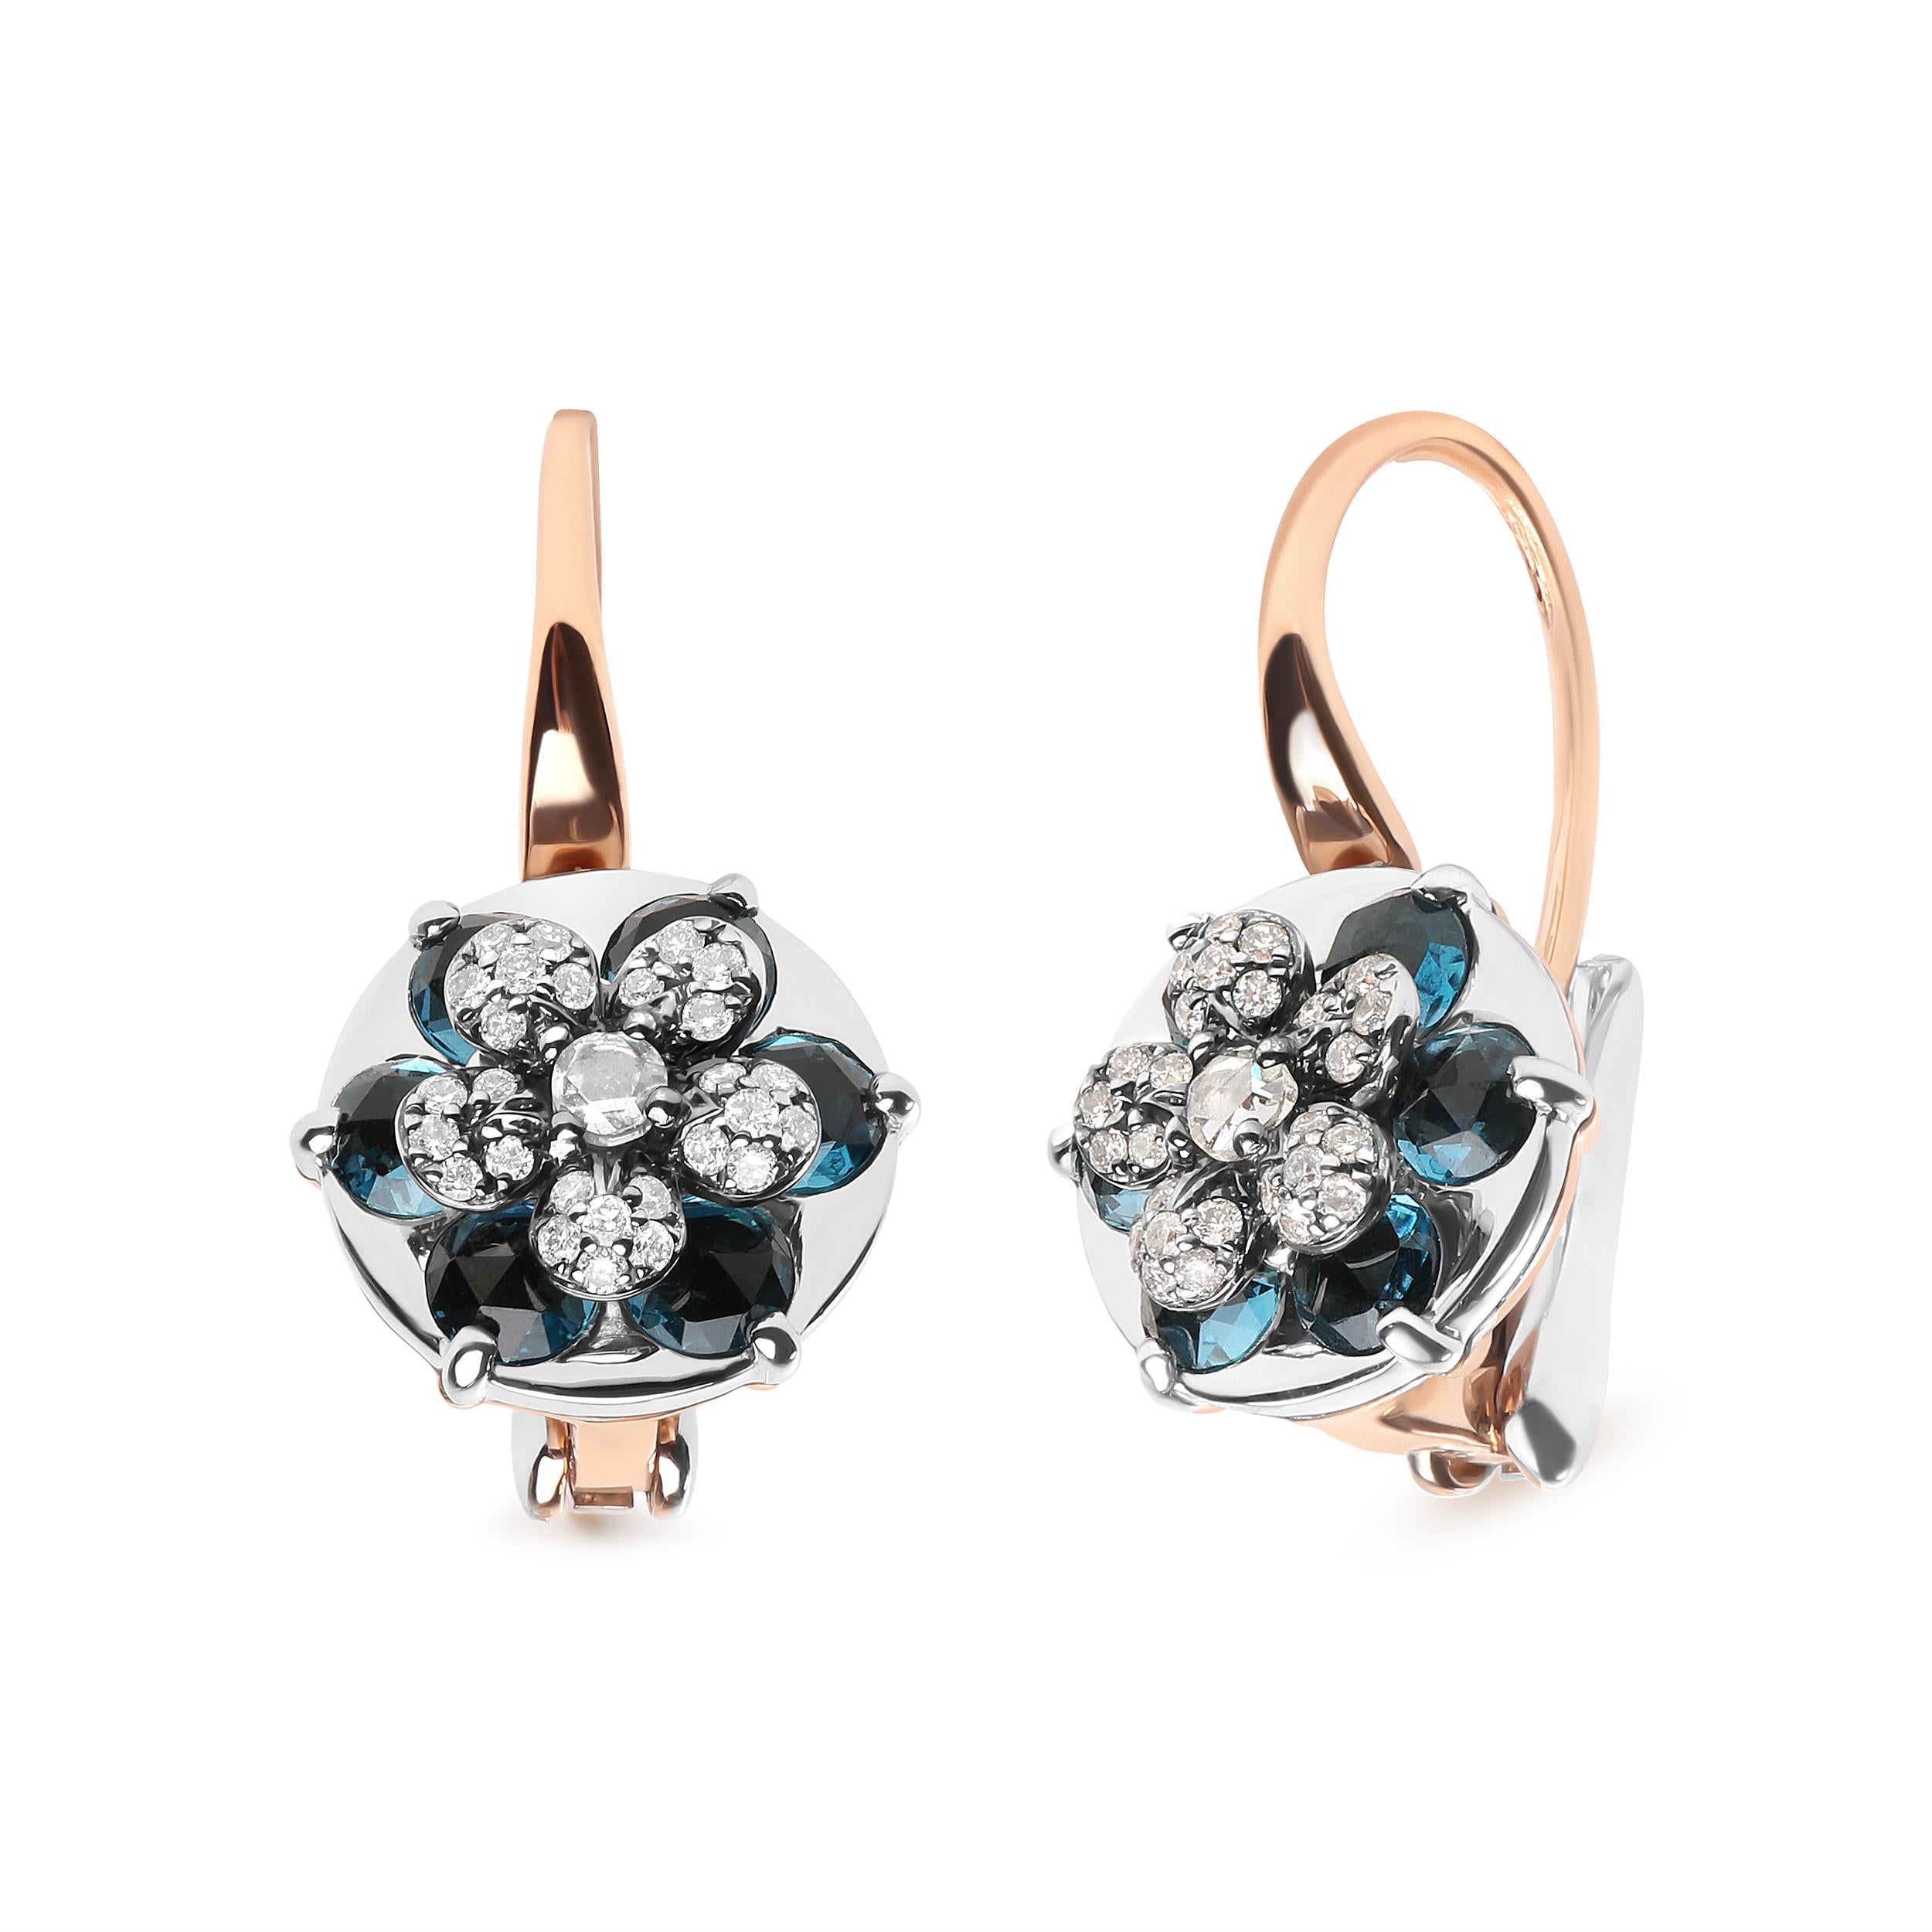 The decadent color of these 18k white and rose gold drop hoop earrings is mesmerizing! Natural 2.6mm round heat-treated London blue topaz gemstones radiate their warmth from prong settings in the form of petals to complement the flower motif of the